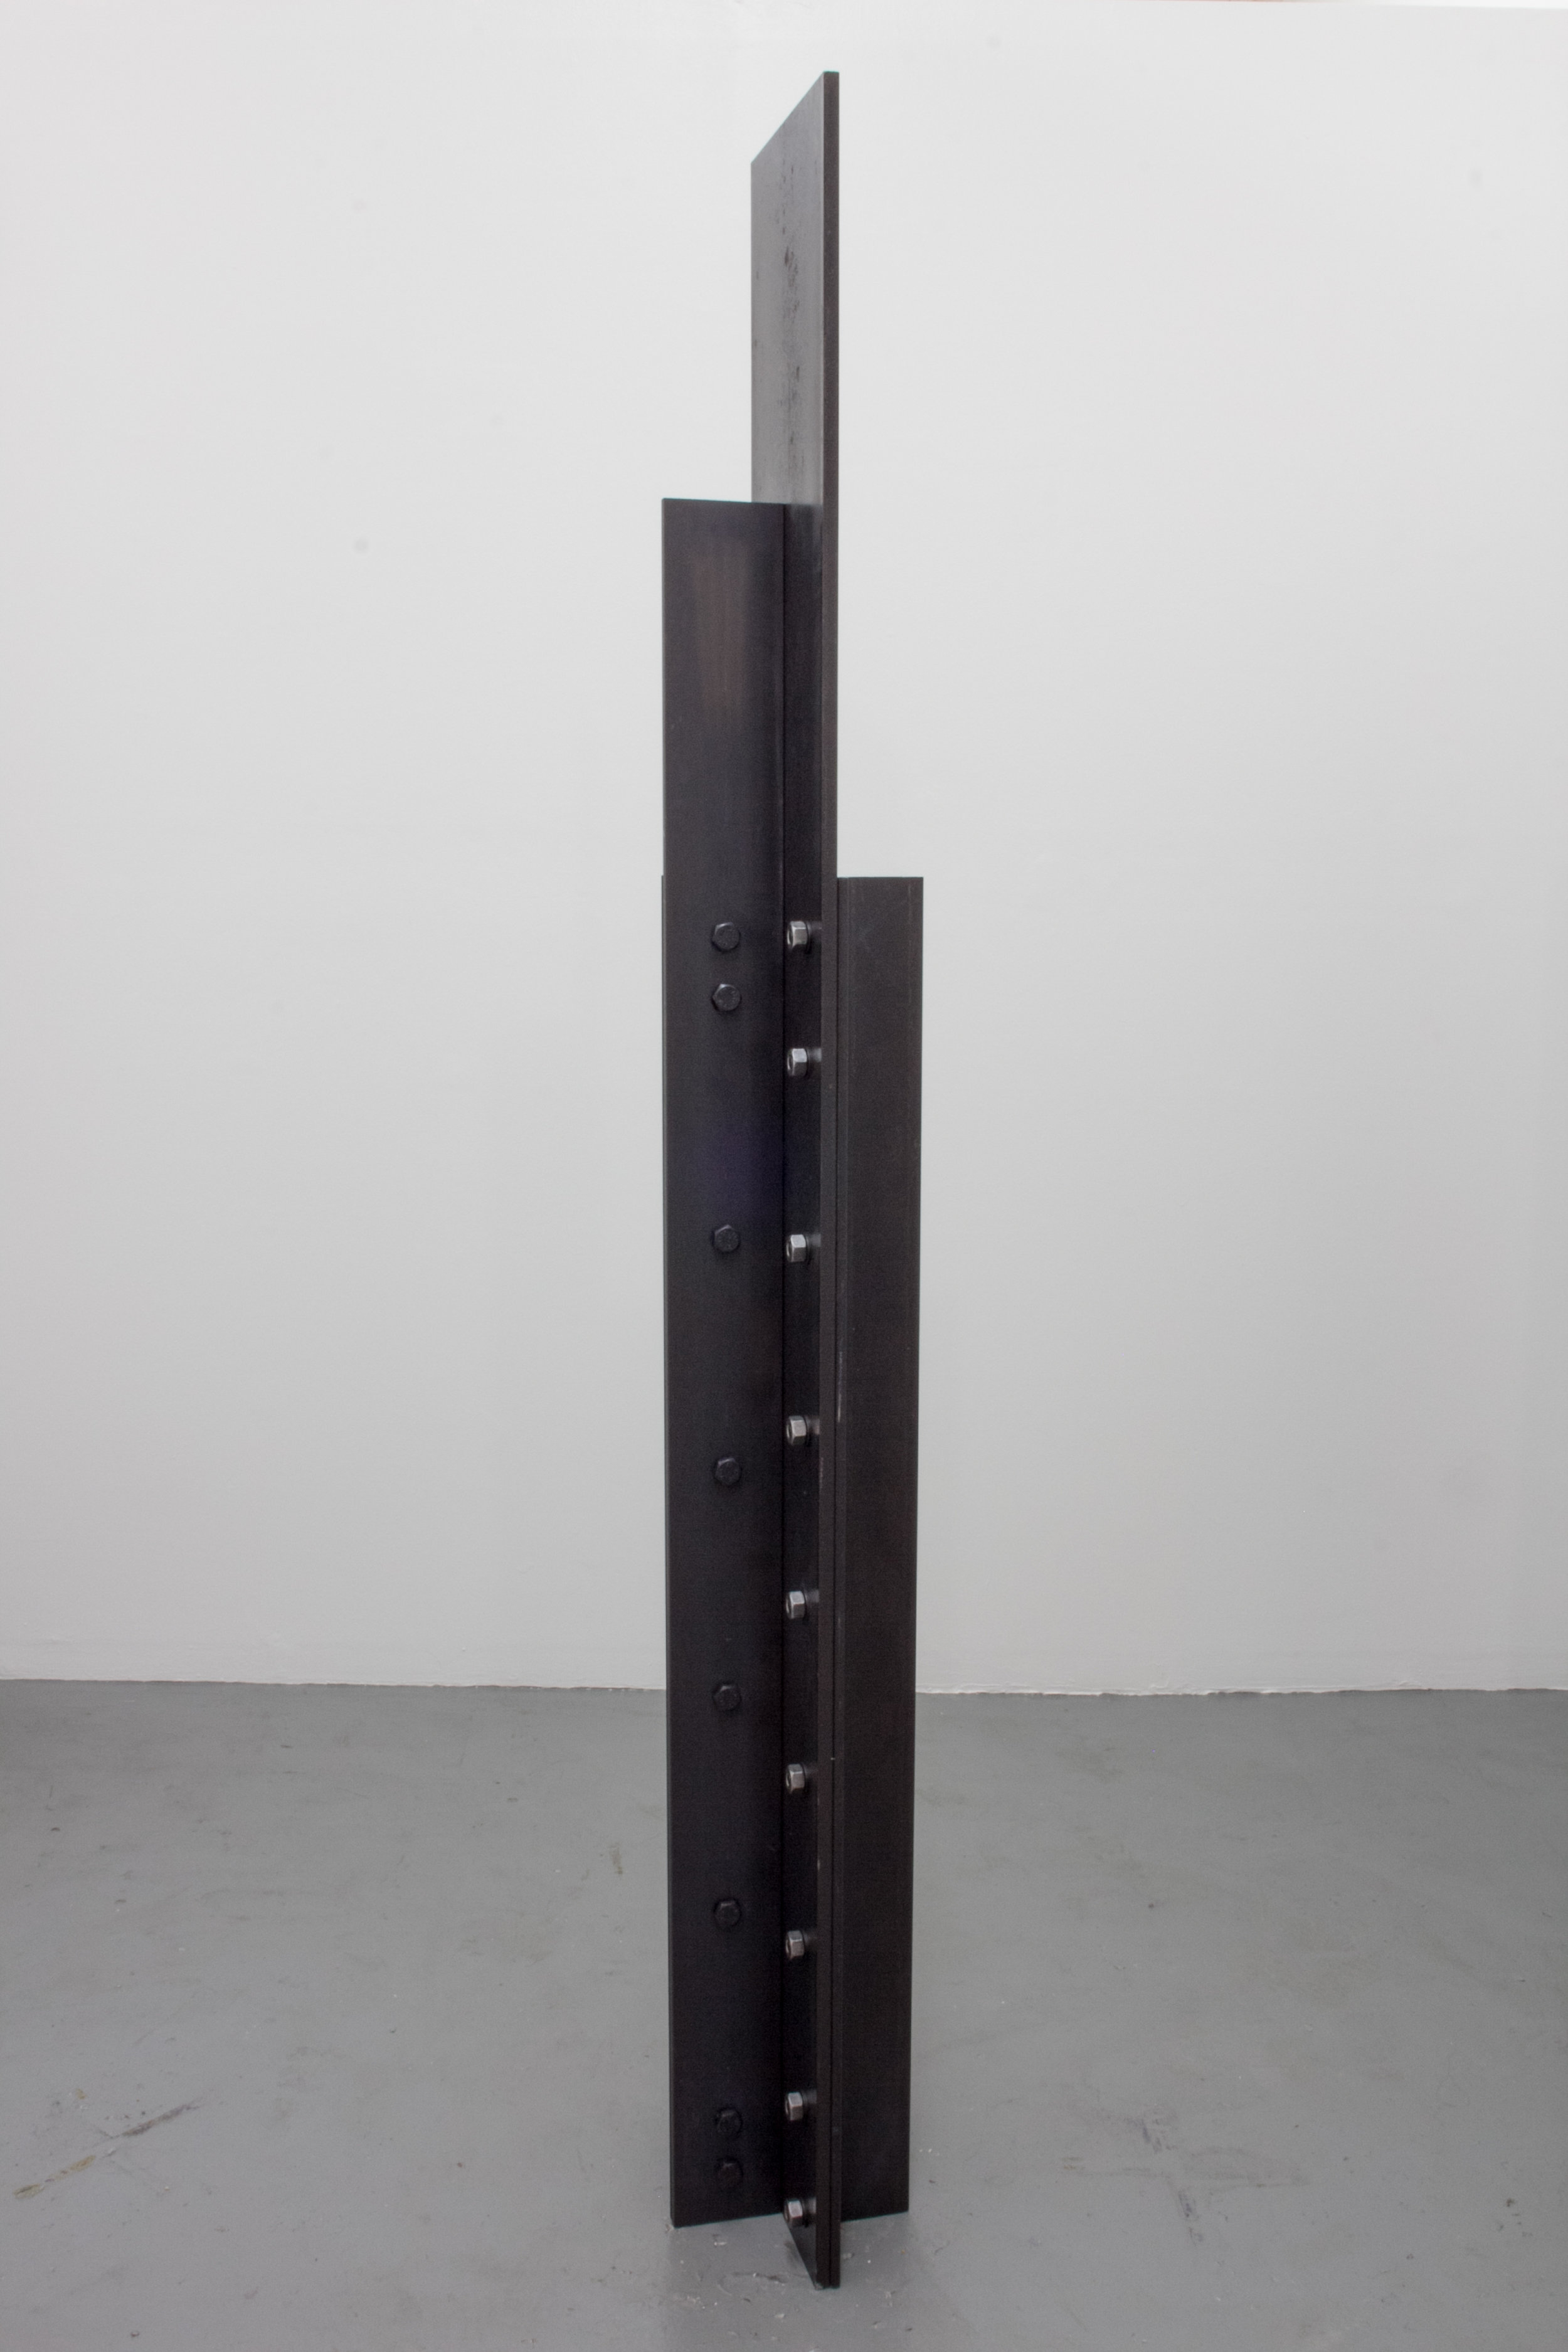   Like That Feeling When You Wake Up In The Morning , 2015 Steel, hardware 72 x 12 x 12 inches 